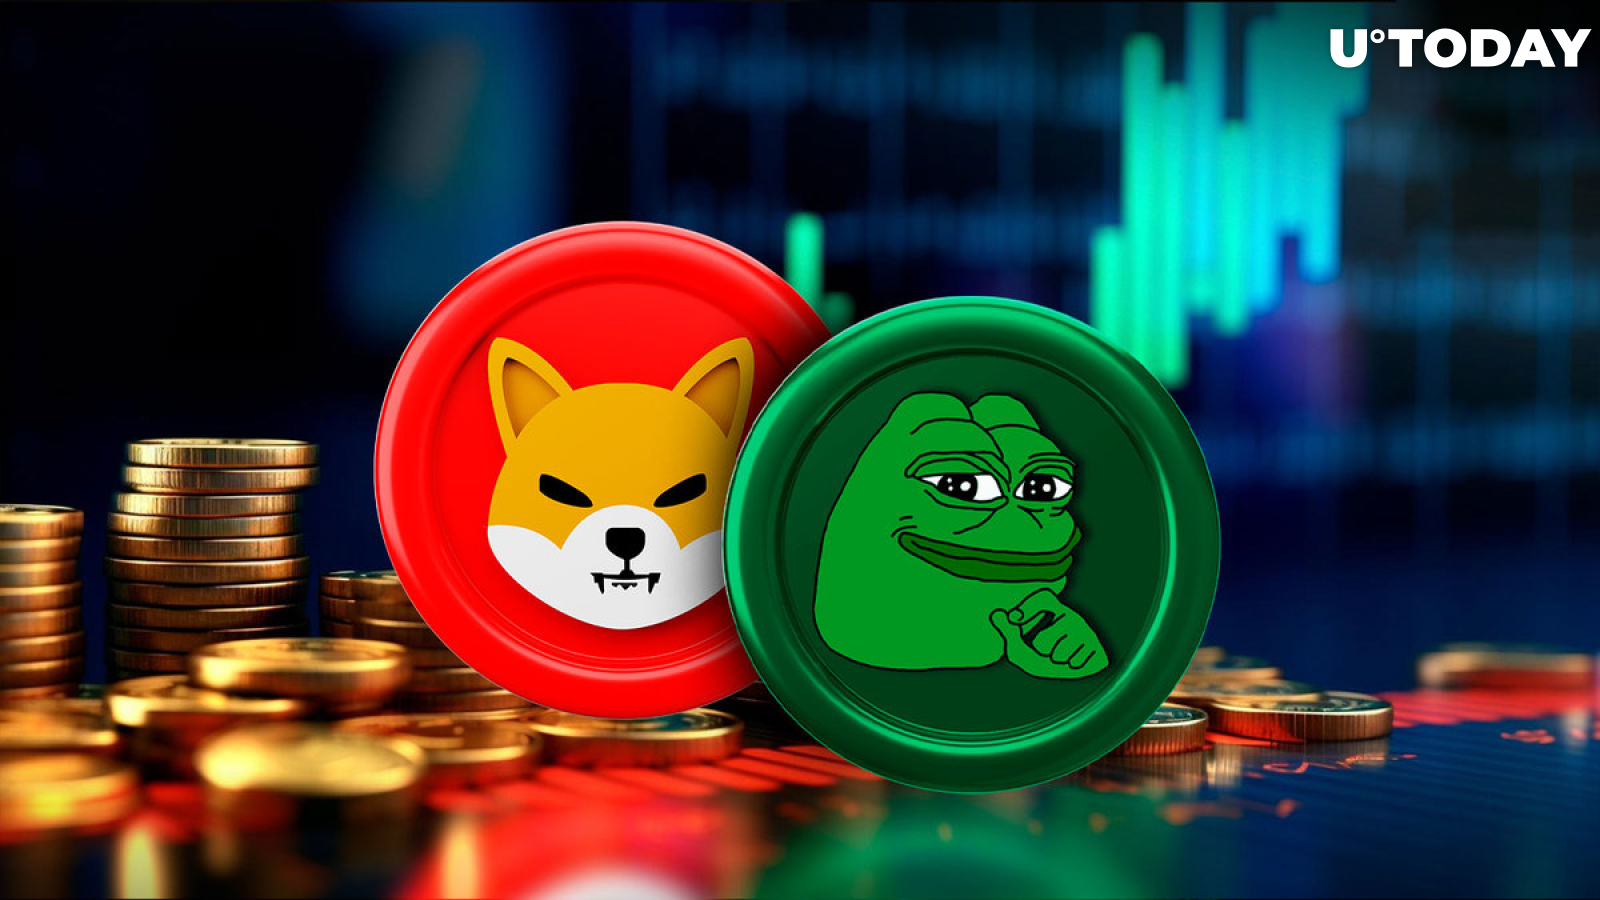 PEPE Becomes Most Profitable Meme Coin, But What About Shiba Inu (SHIB)?